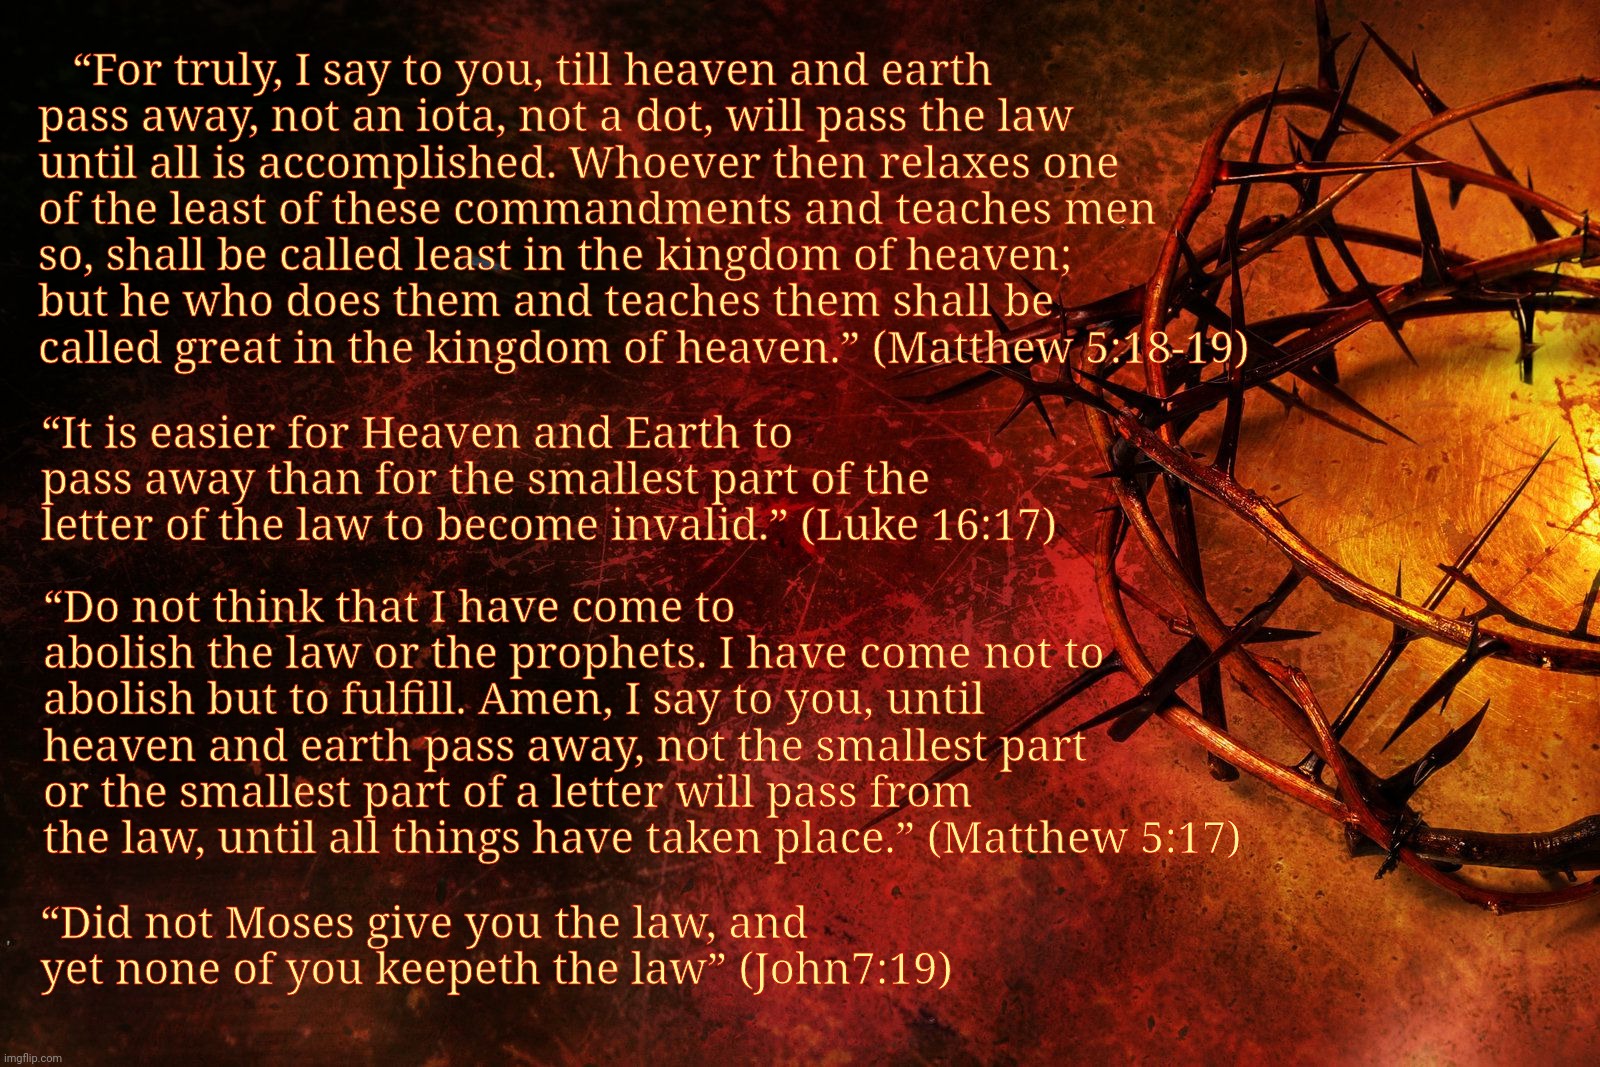 J | “For truly, I say to you, till heaven and earth pass away, not an iota, not a dot, will pass the law until all is accomplished. Whoever then relaxes one of the least of these commandments and teaches men so, shall be called least in the kingdom of heaven;
but he who does them and teaches them shall be called great in the kingdom of heaven.” (Matthew 5:18-19); “It is easier for Heaven and Earth to pass away than for the smallest part of the letter of the law to become invalid.” (Luke 16:17); “Do not think that I have come to abolish the law or the prophets. I have come not to abolish but to fulfill. Amen, I say to you, until heaven and earth pass away, not the smallest part or the smallest part of a letter will pass from the law, until all things have taken place.” (Matthew 5:17); “Did not Moses give you the law, and yet none of you keepeth the law” (John7:19) | image tagged in j,jesus crown,jesus law,jesus,jesus christ | made w/ Imgflip meme maker